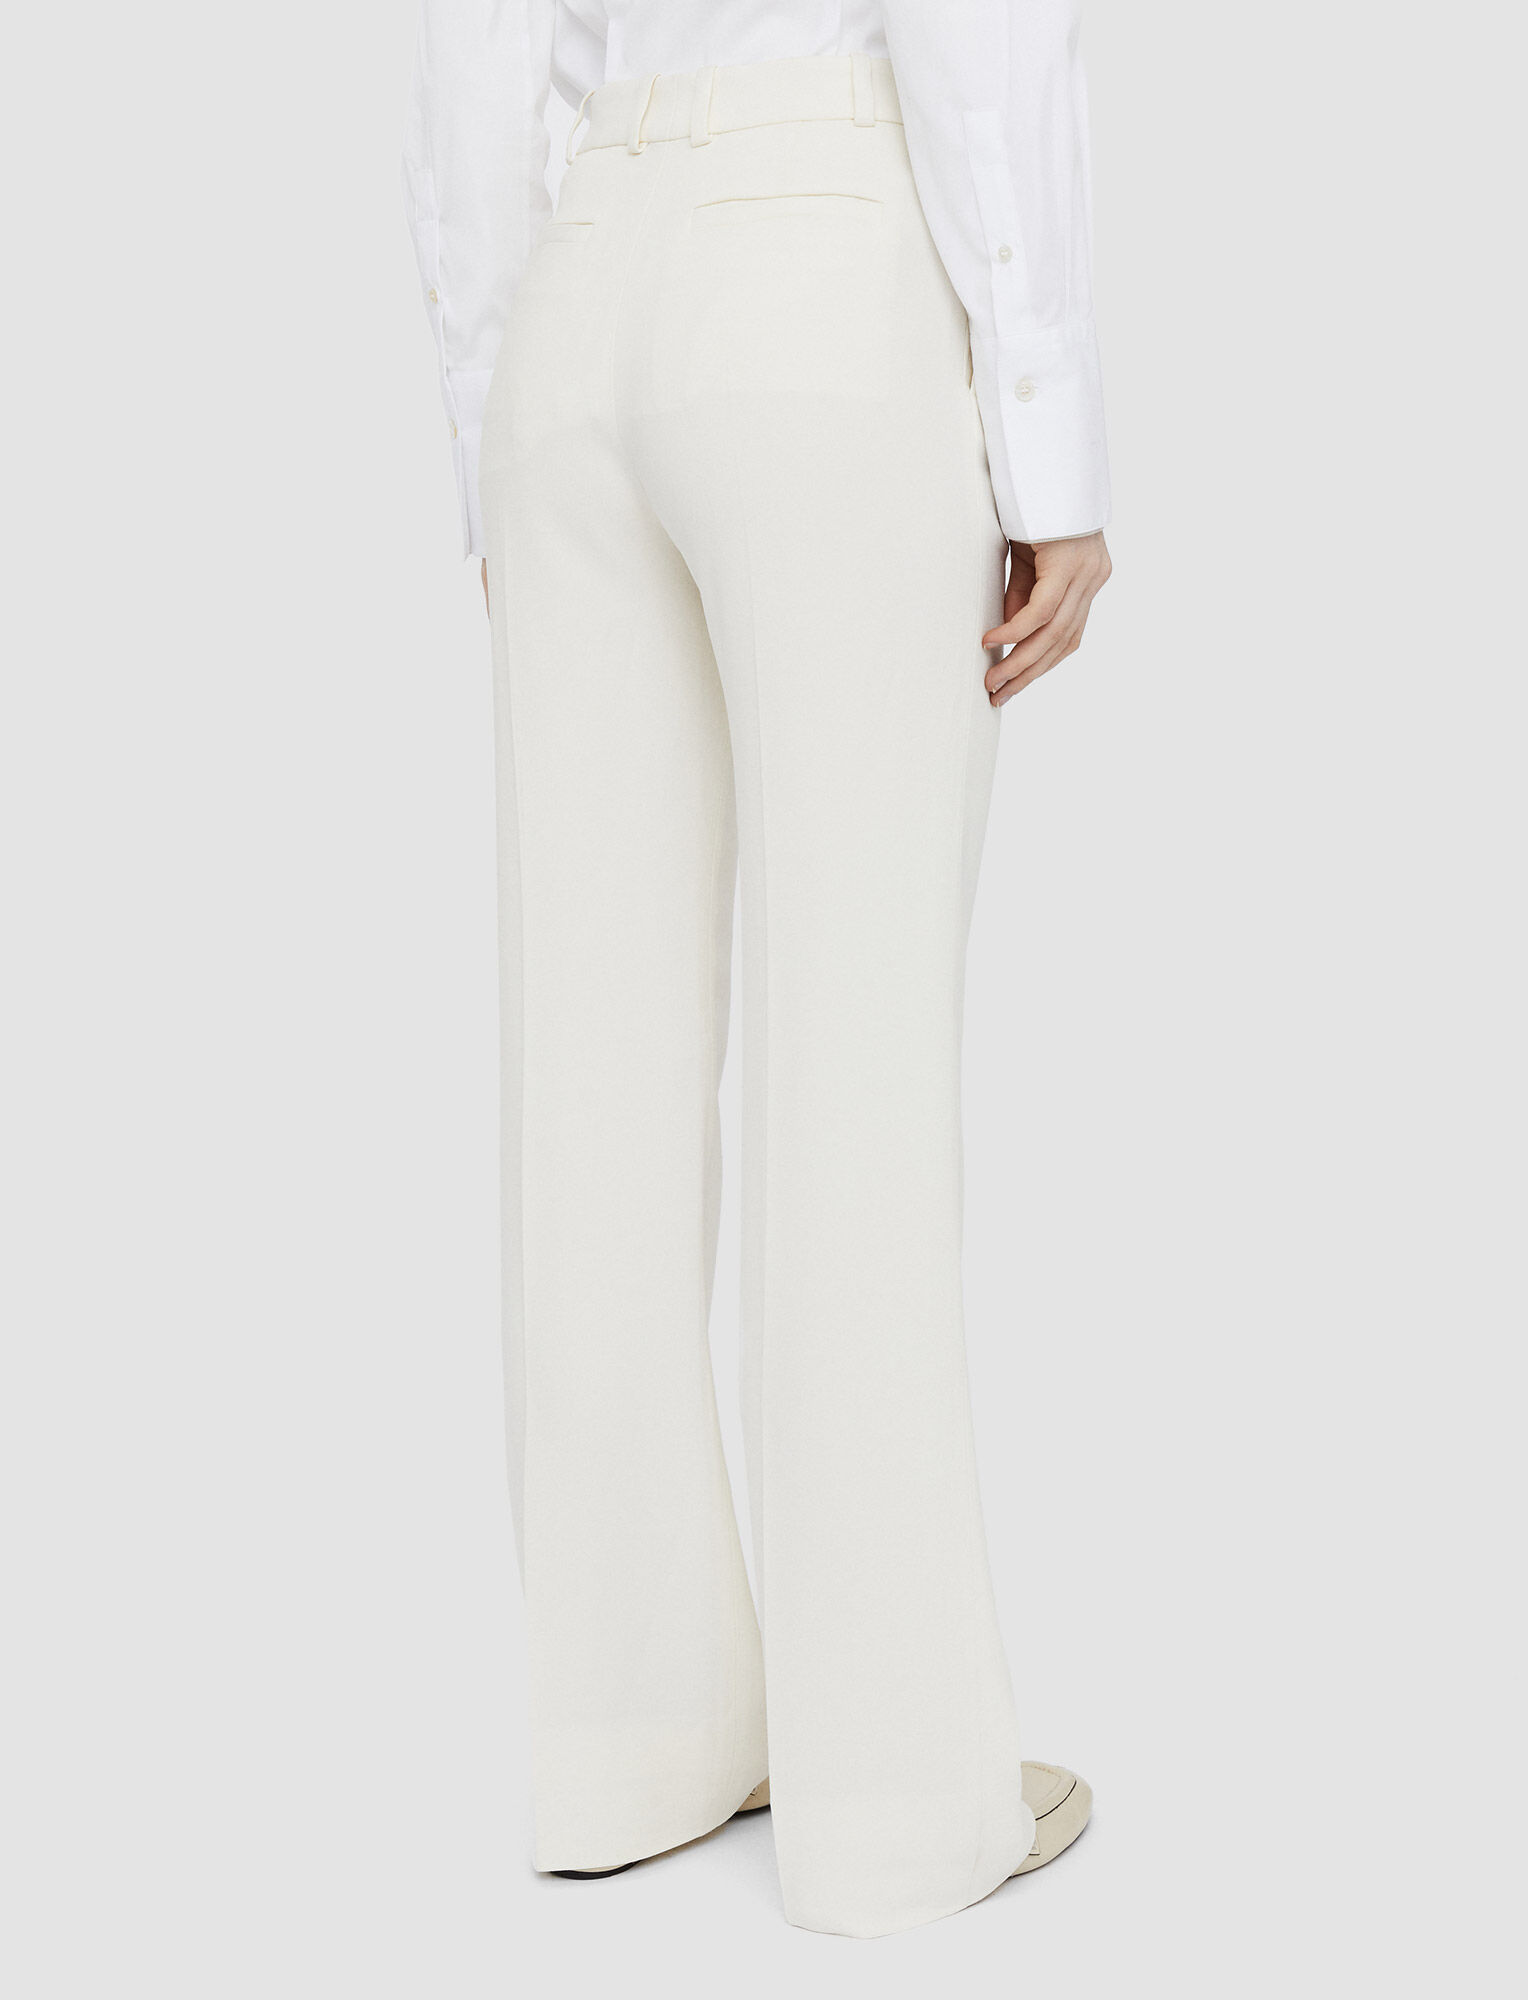 Joseph, Comfort Cady Morissey Trousers, in Ivory